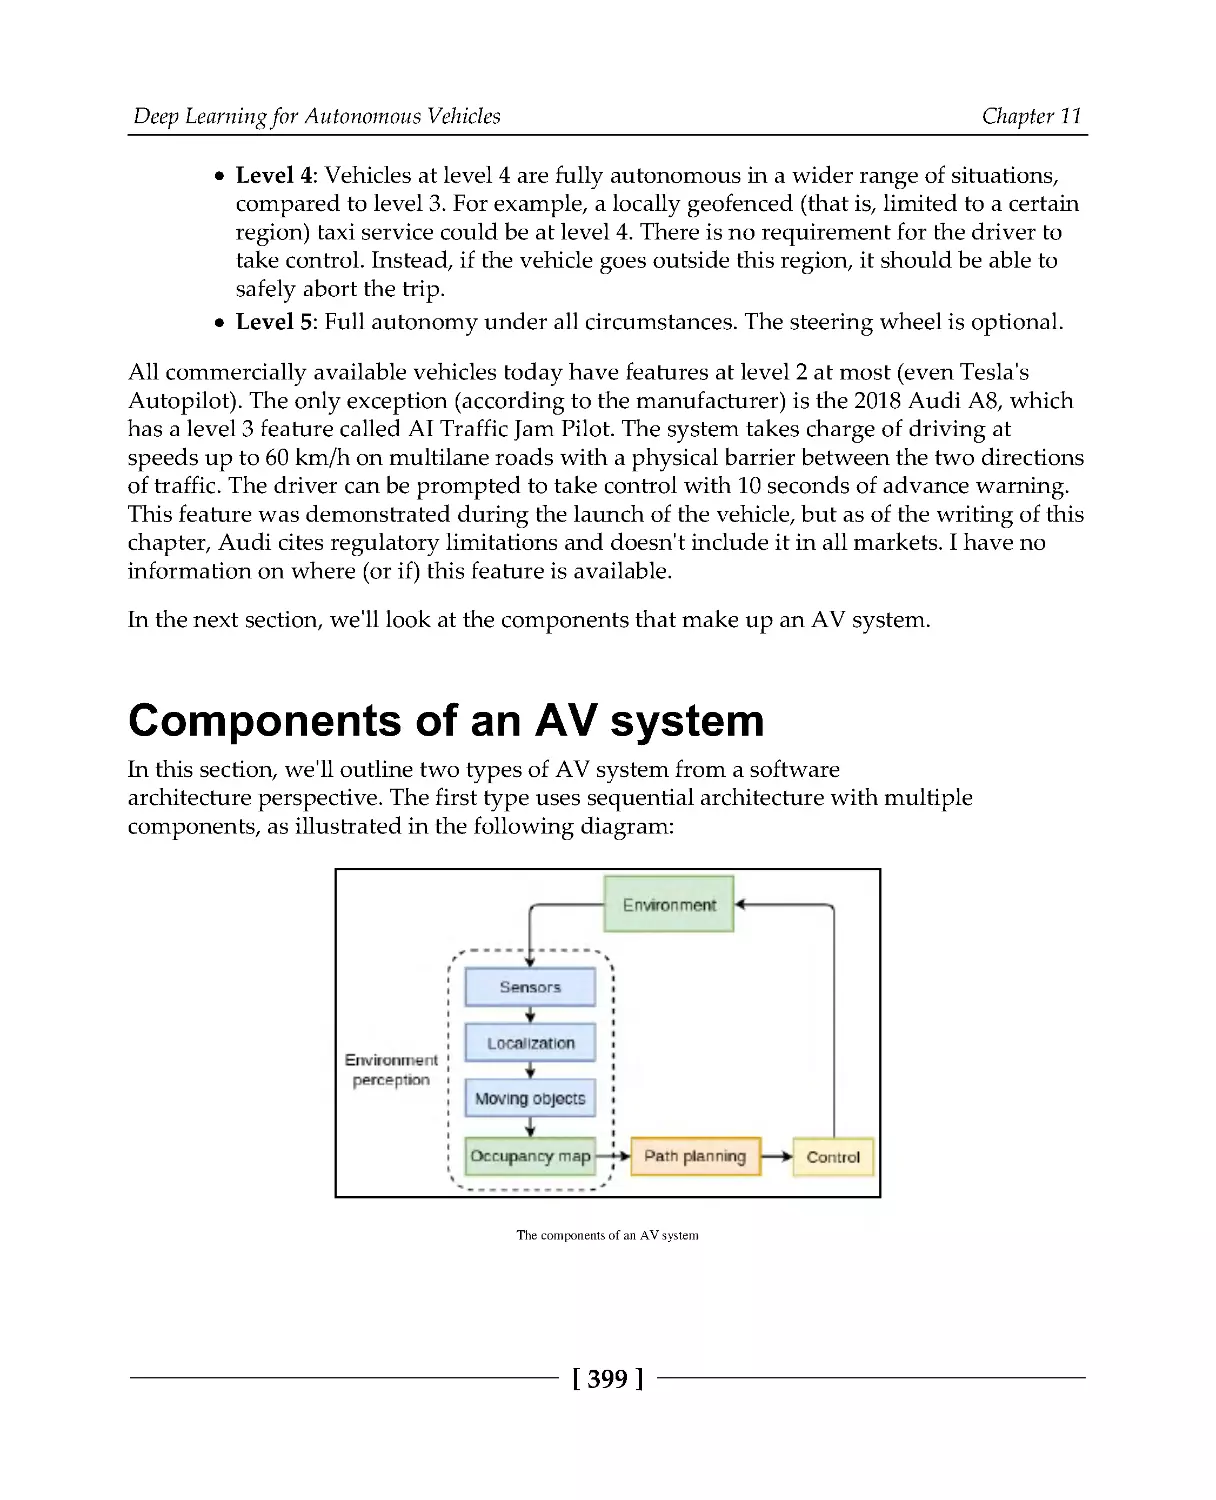 Components of an AV system 